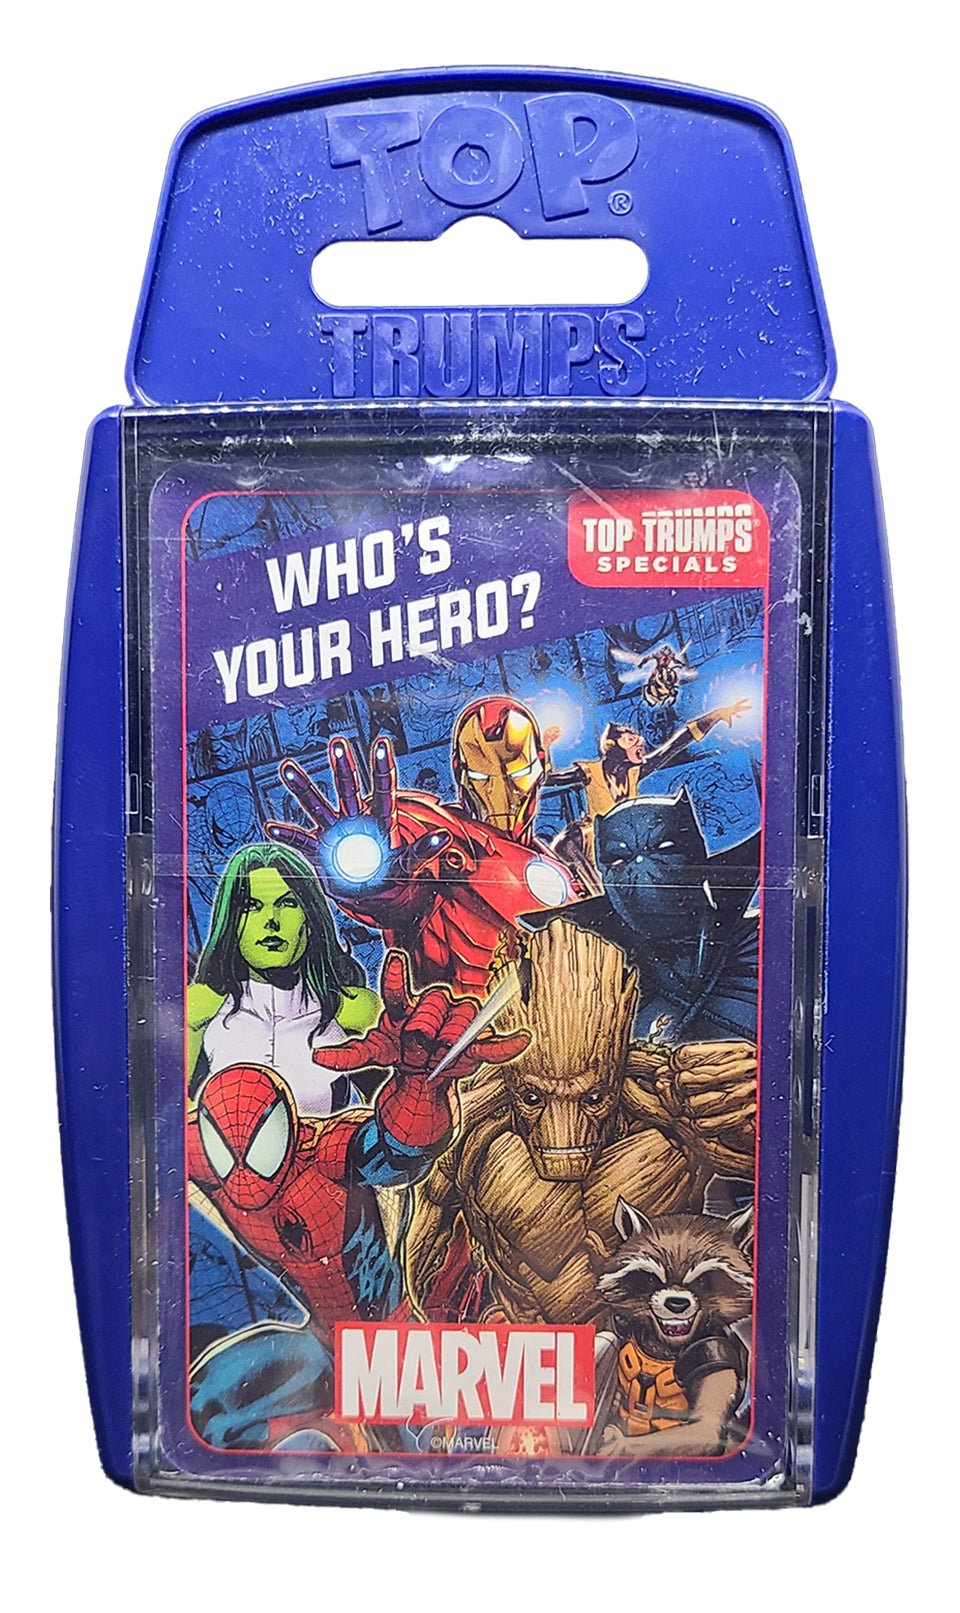 2021 Marvel Universe Who's Your Hero? Top Trumps Specials UK Limited Card Game Marvel Sealed Deck - Hobby Gems